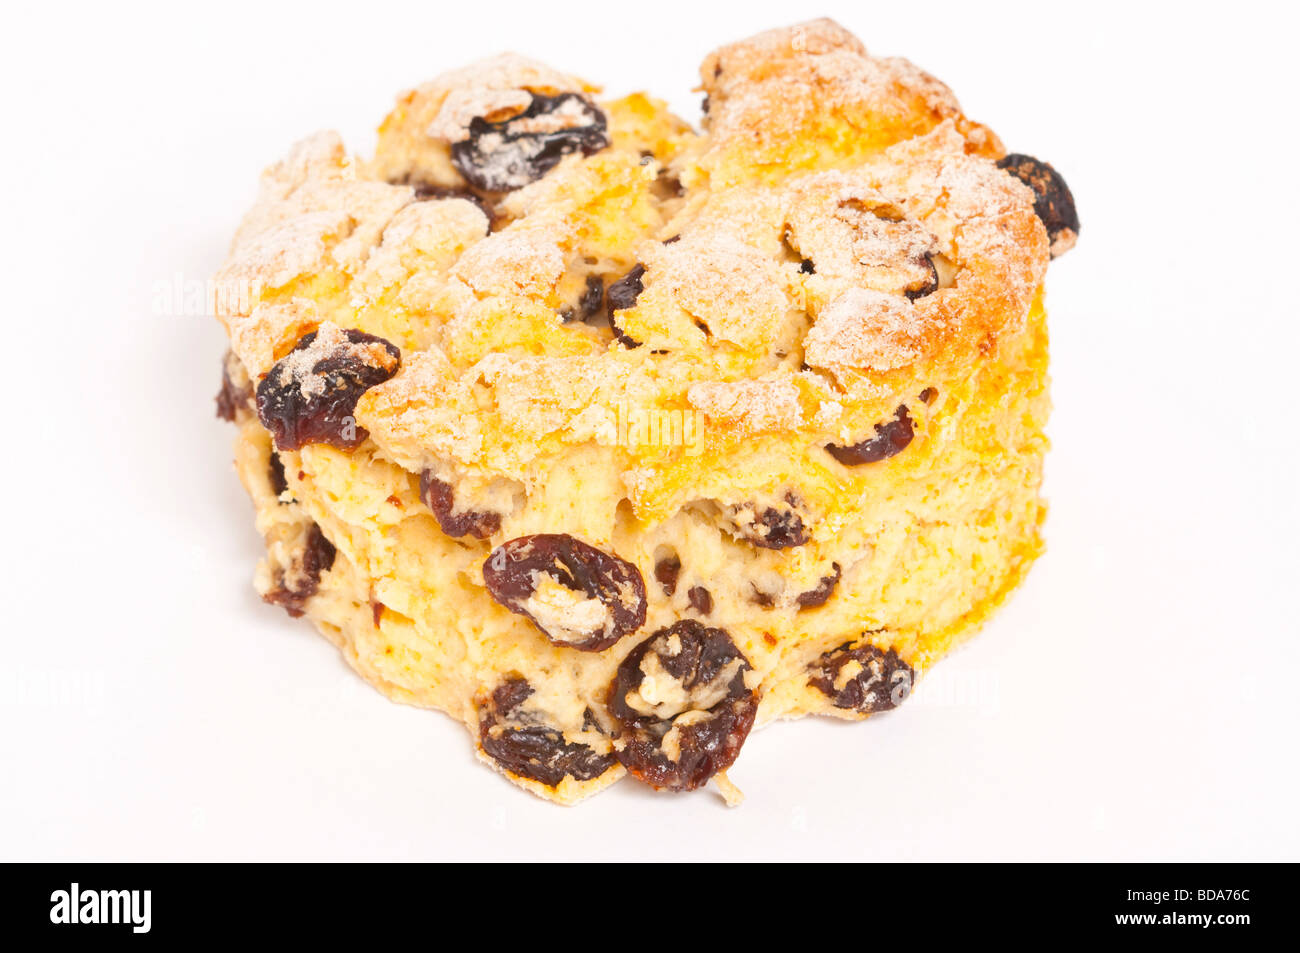 A close up of a homemade fruit scone on a white background Stock Photo